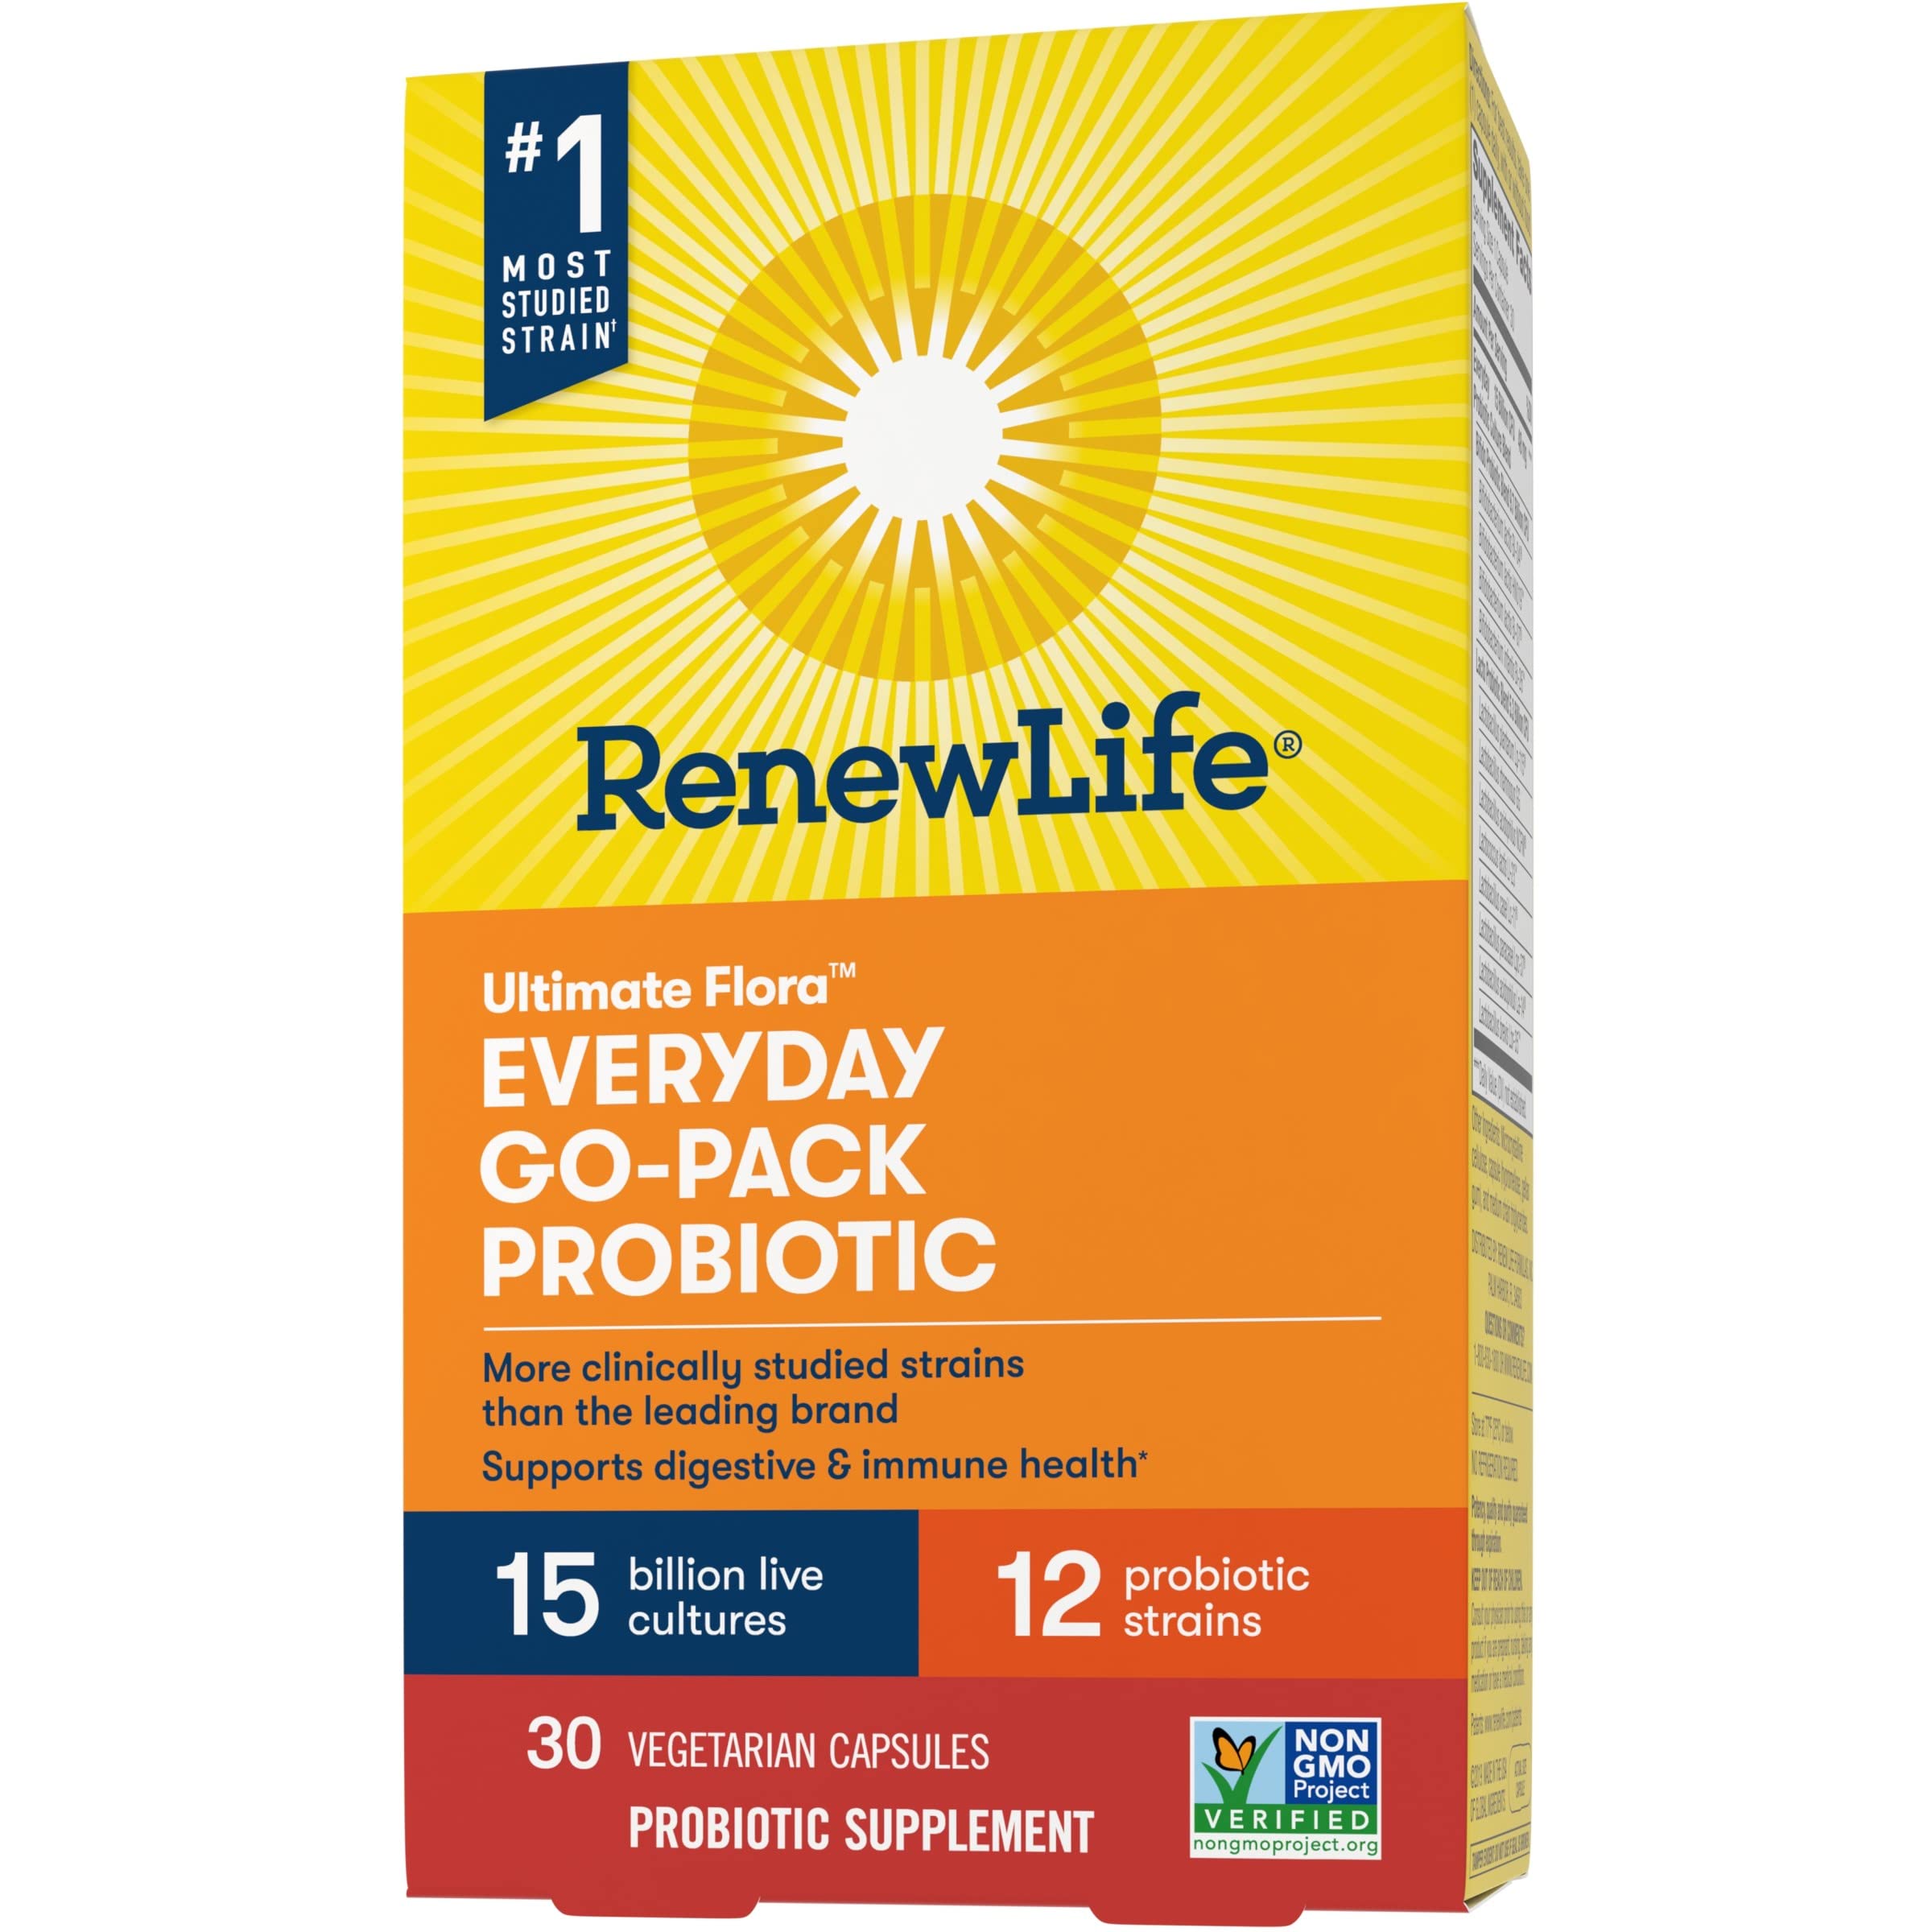 Renew Life Adult Probiotics, 15 Billion CFU Guaranteed, Everyday Go-Pack Probiotic Supplement for Digestive & Immune Health, Shelf Stable, Gluten Dairy & Soy Free, 30 Capsules